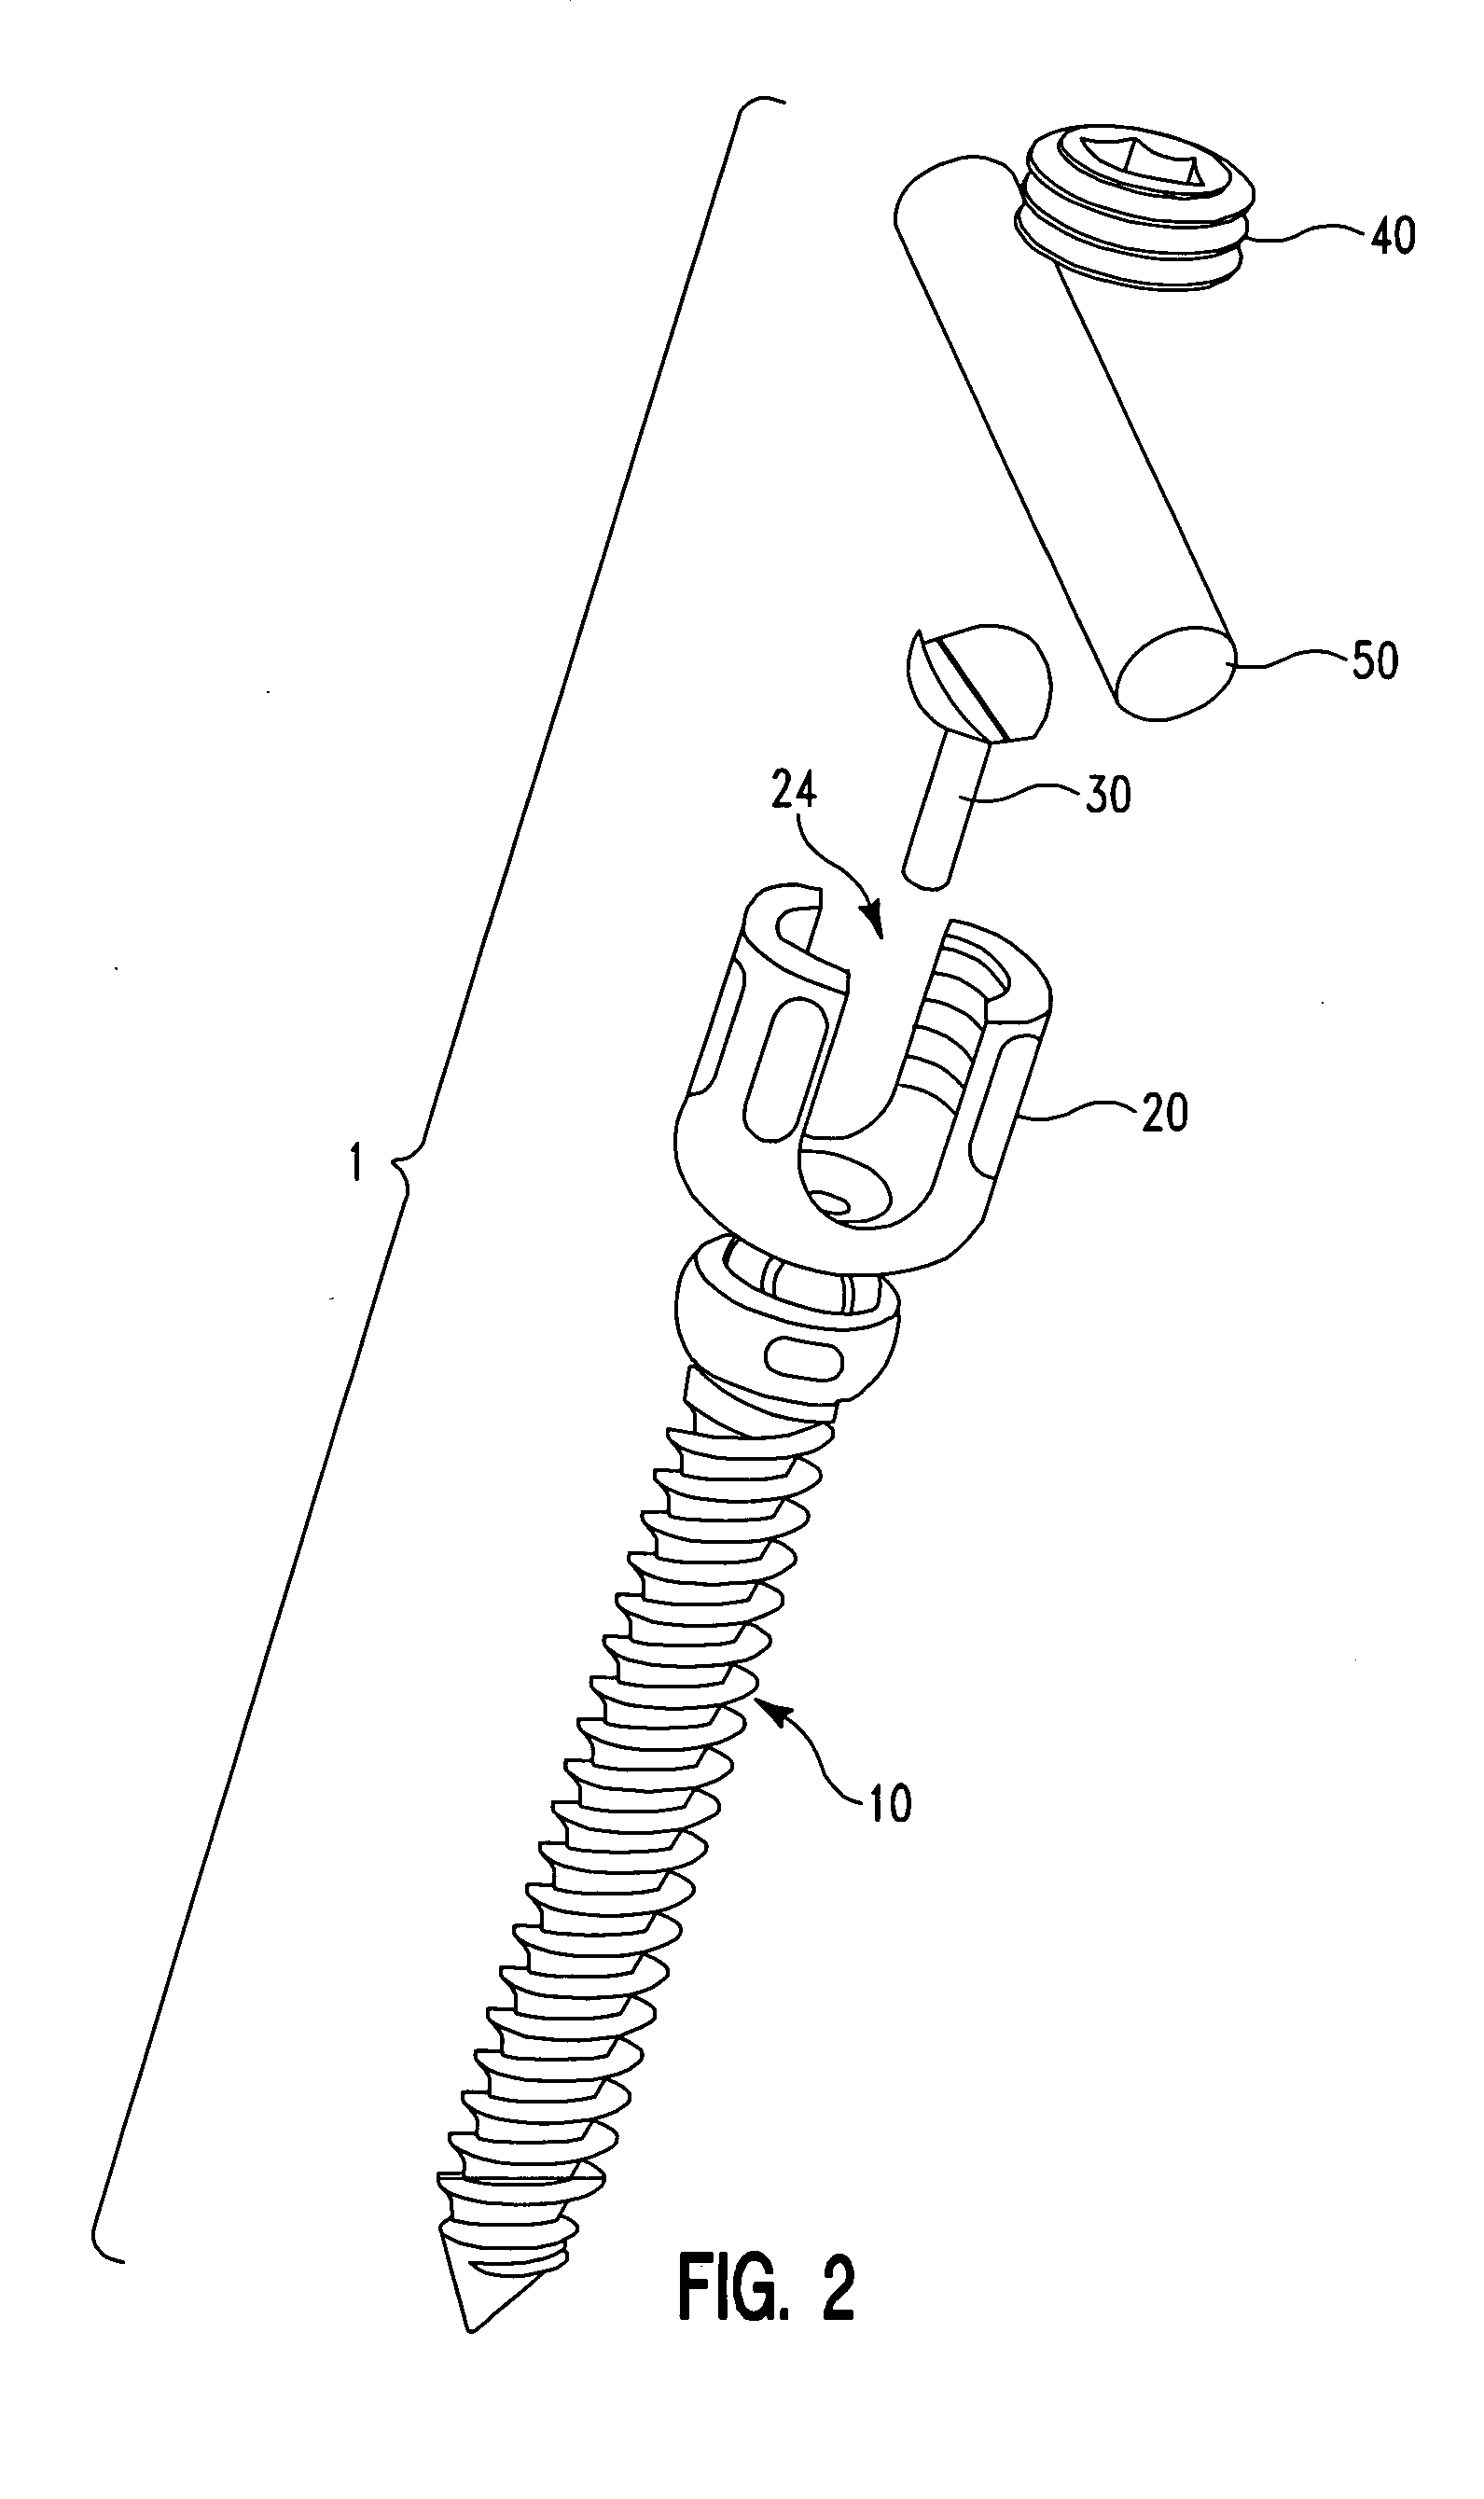 Polyaxial pedicle screw assembly